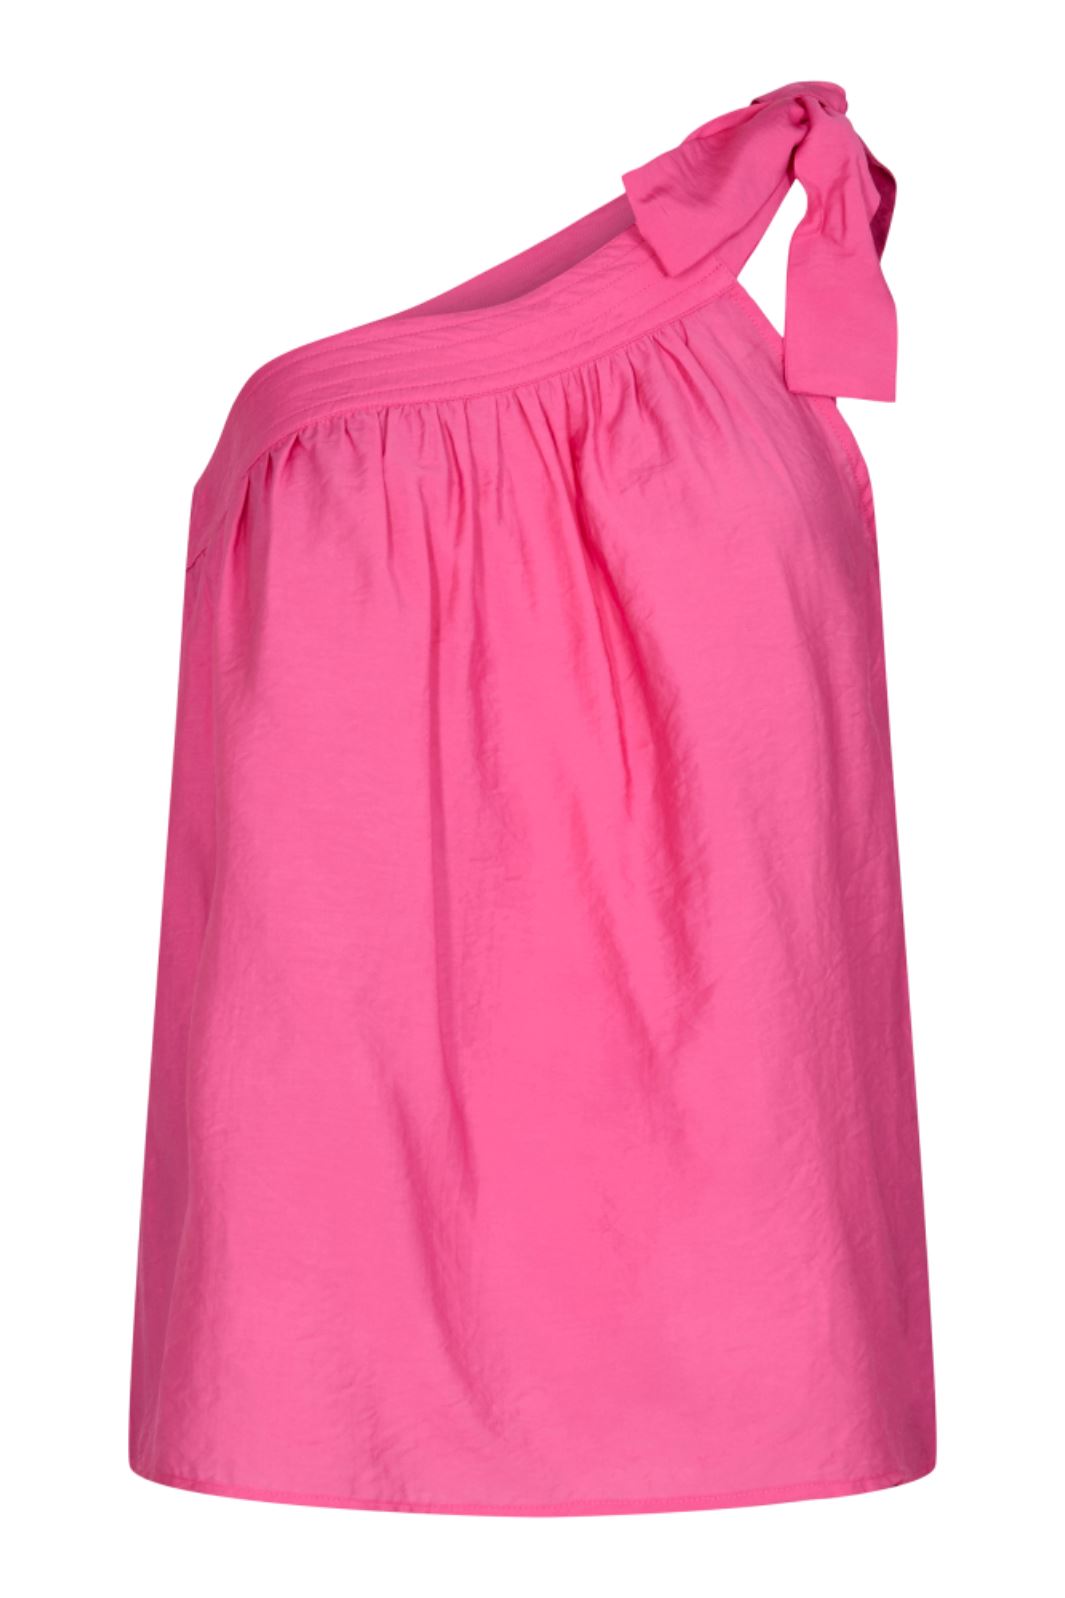 Co´couture - Callum Asym Top - 330 Pink Toppe 